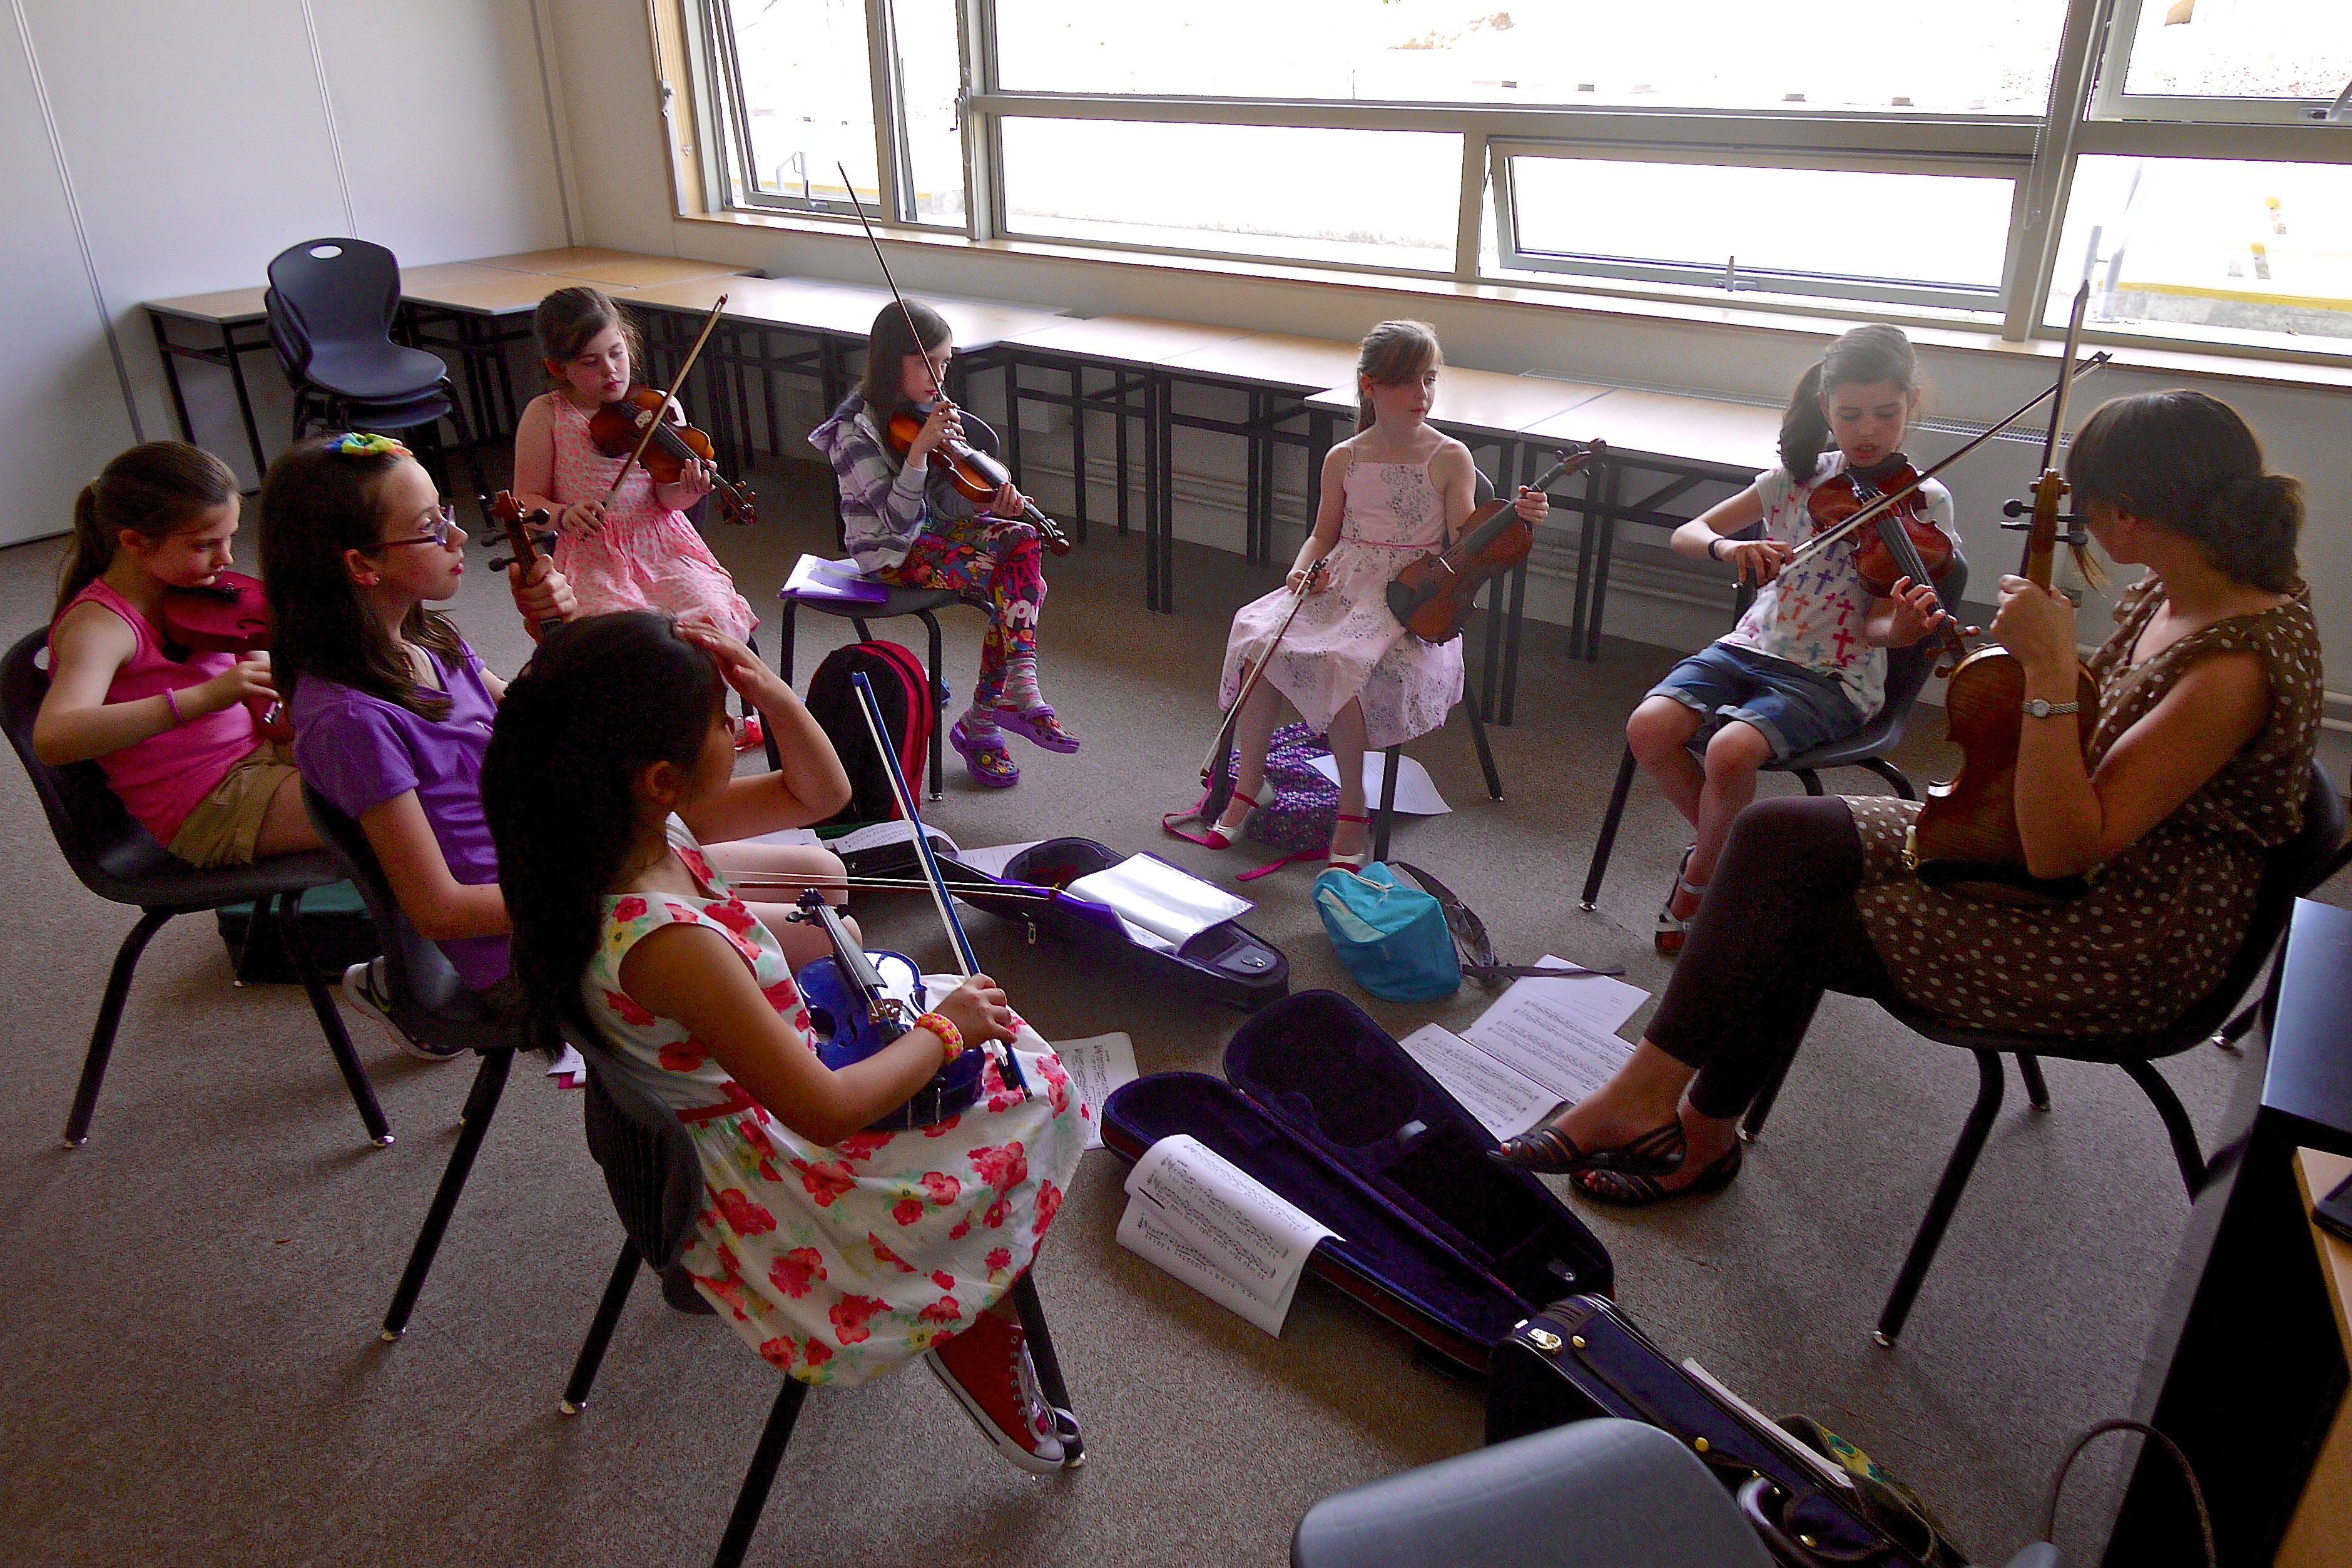 Theresa Kavanagh Fiddle Tutor at Ceol na Coille Summer School 2014